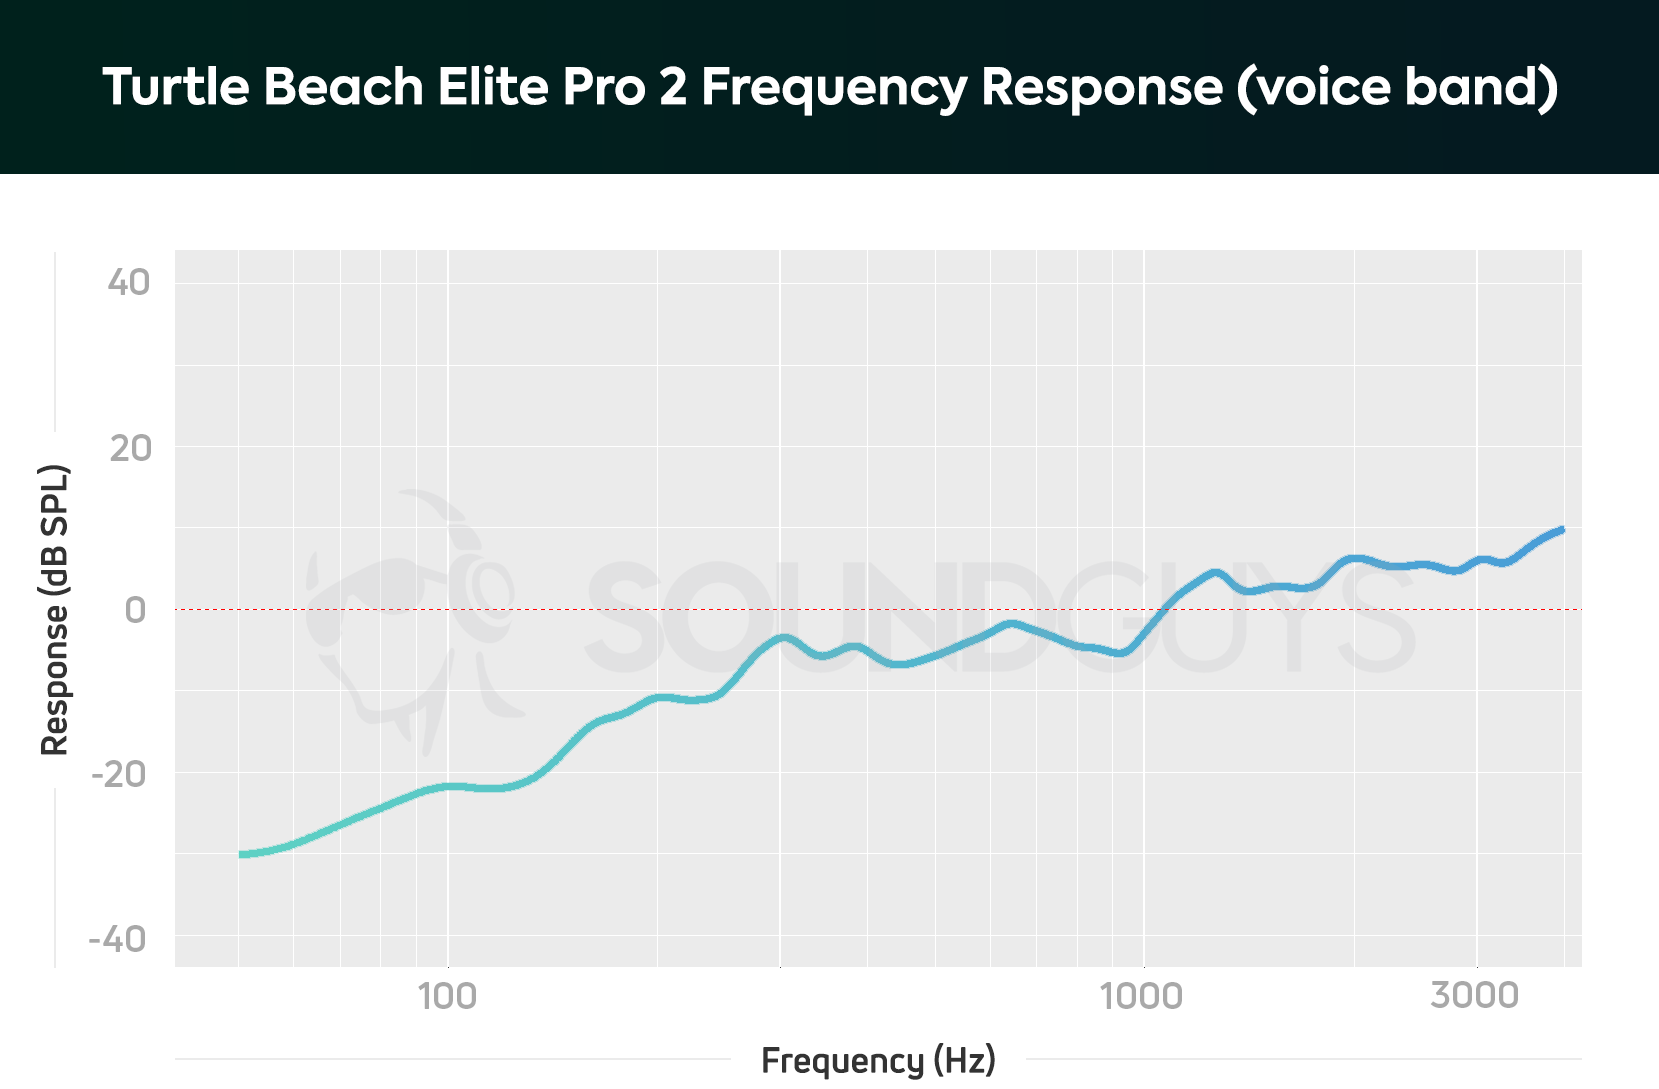 A frequency response chart for The Turtle Beach Elite Pro 2 gaming headset microphone, which shows a pretty big de-emphasis in the bass range.